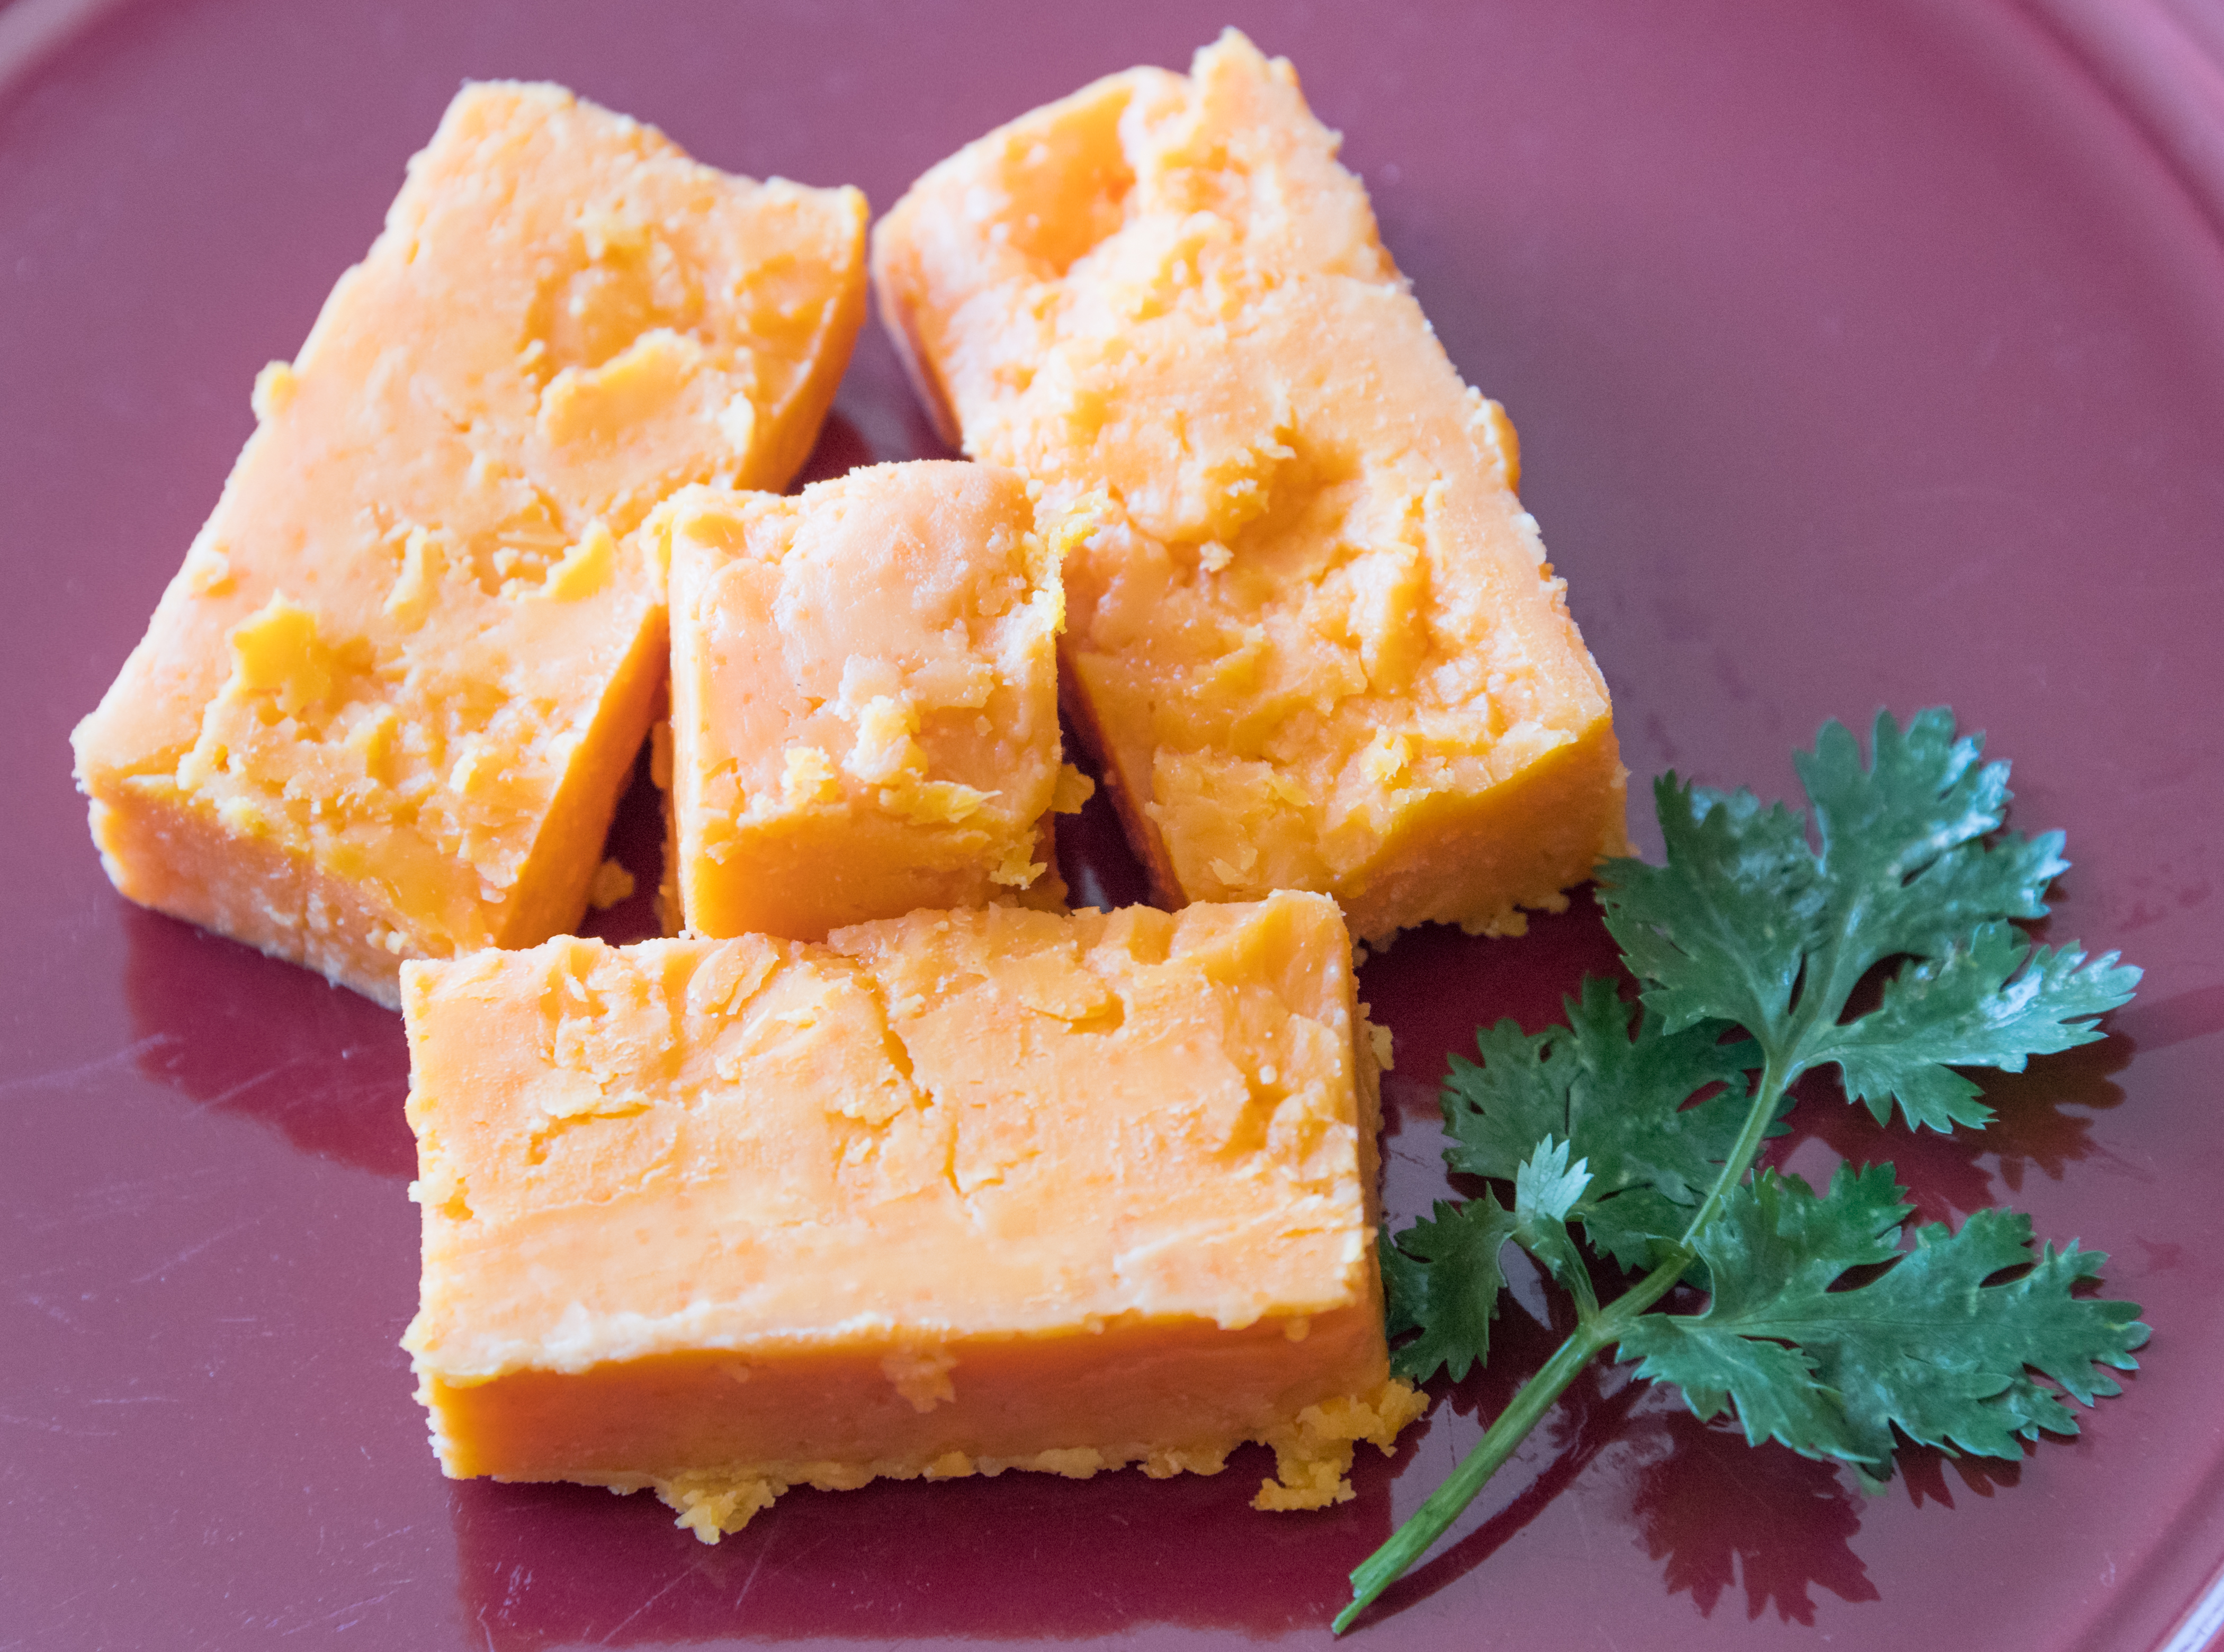 English red leicester hard ripened cheese. Four blocks of...